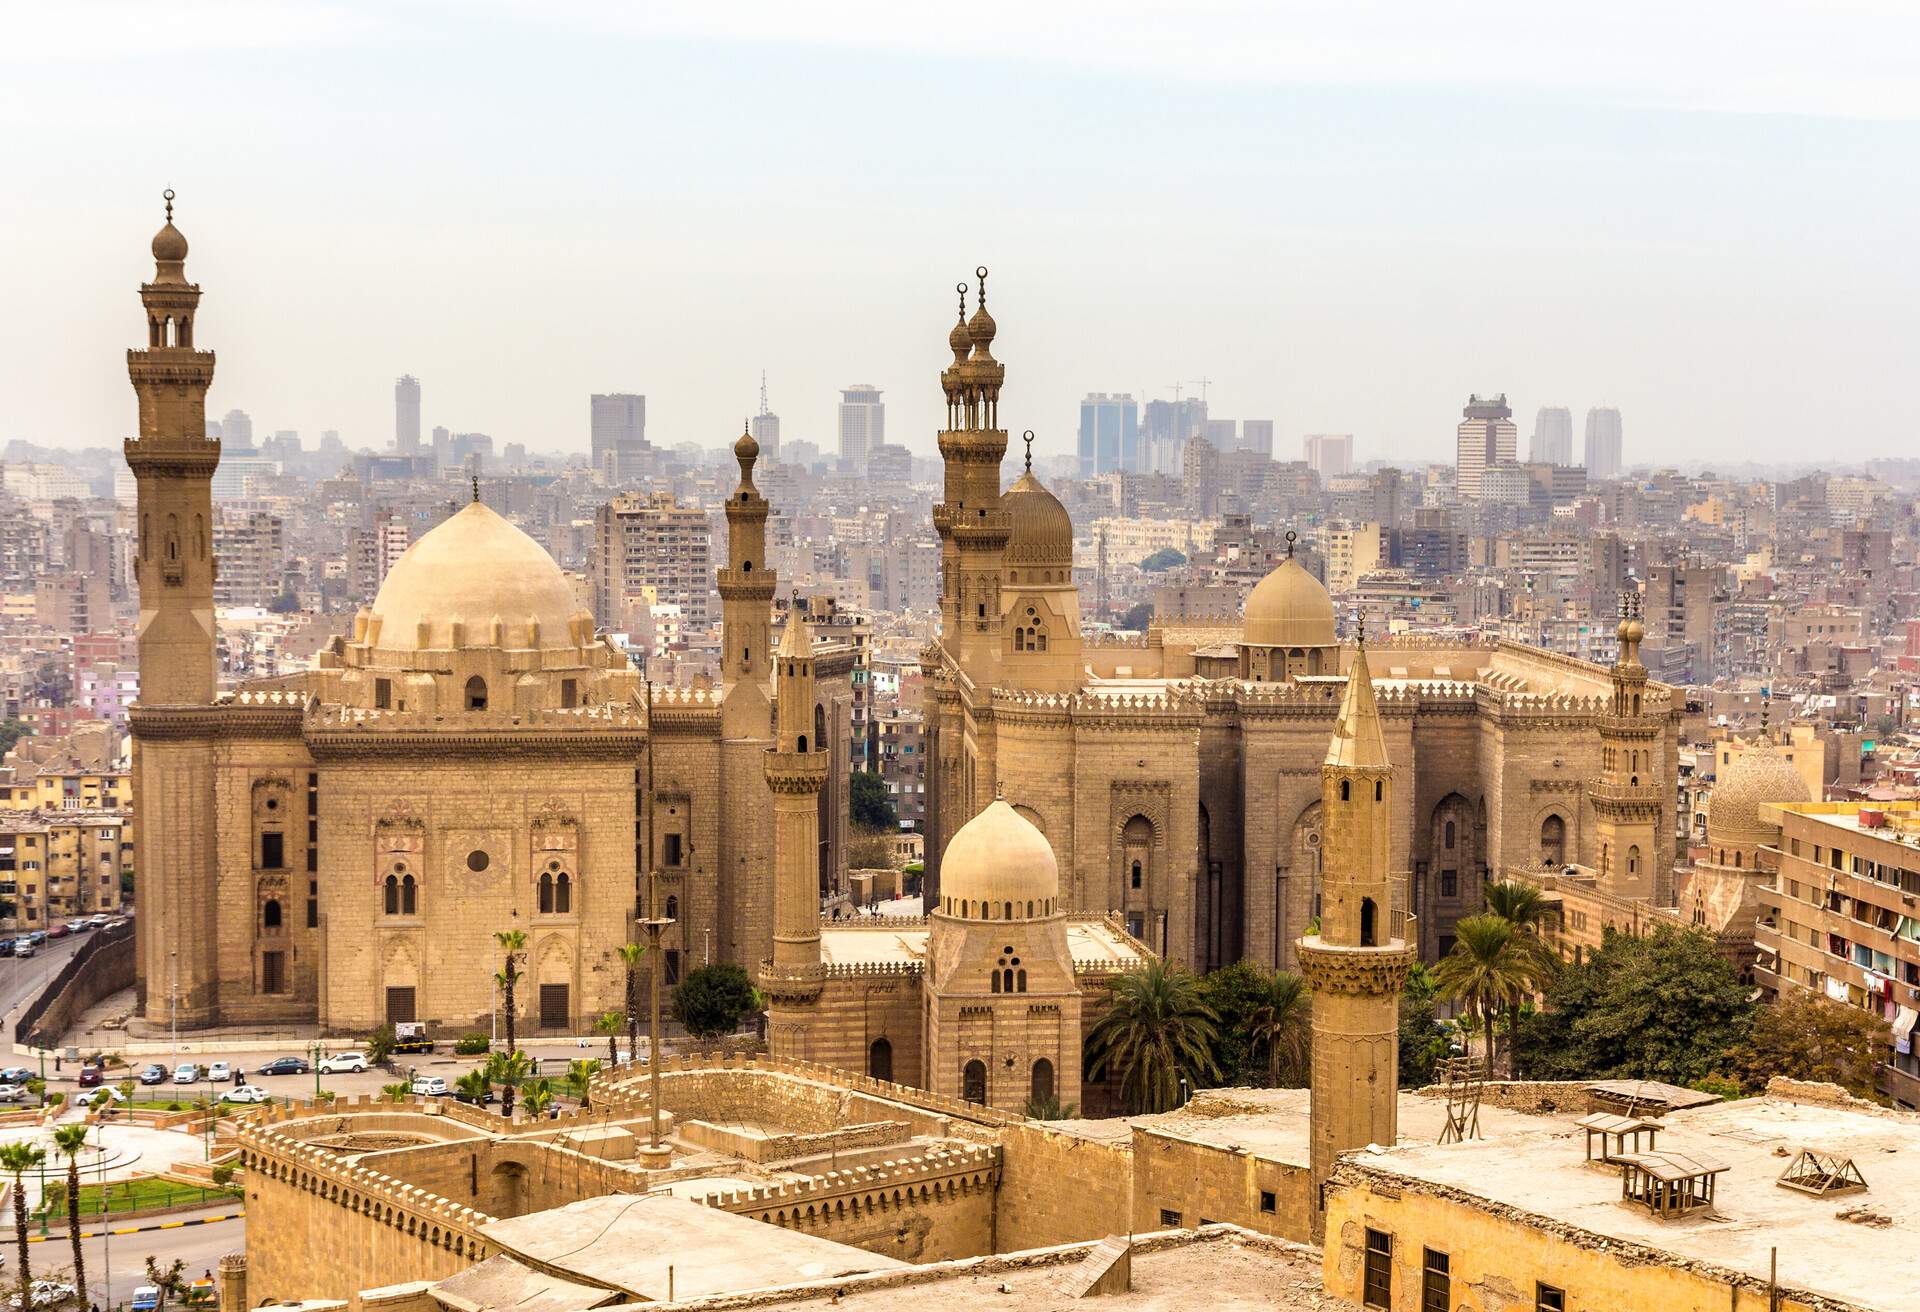 View of the Mosques of Sultan Hassan and Al-Rifai in Cairo - Egypt